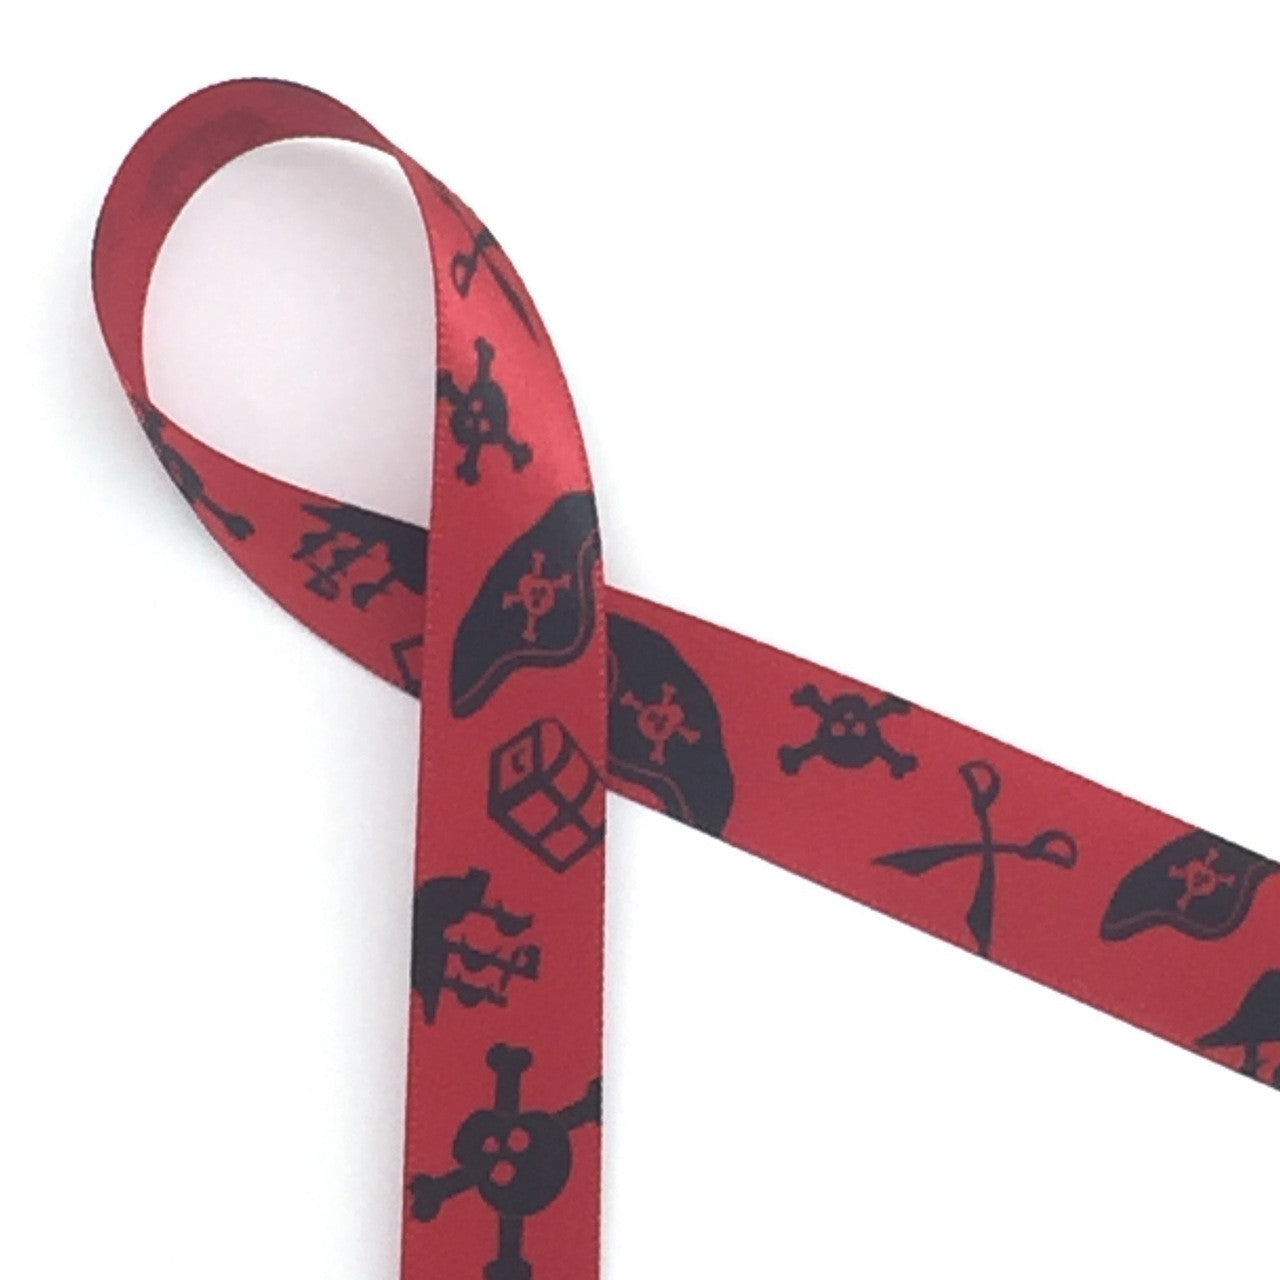 Pirate Ribbon silhouettes in black on 5/8 red single face satin ribbon